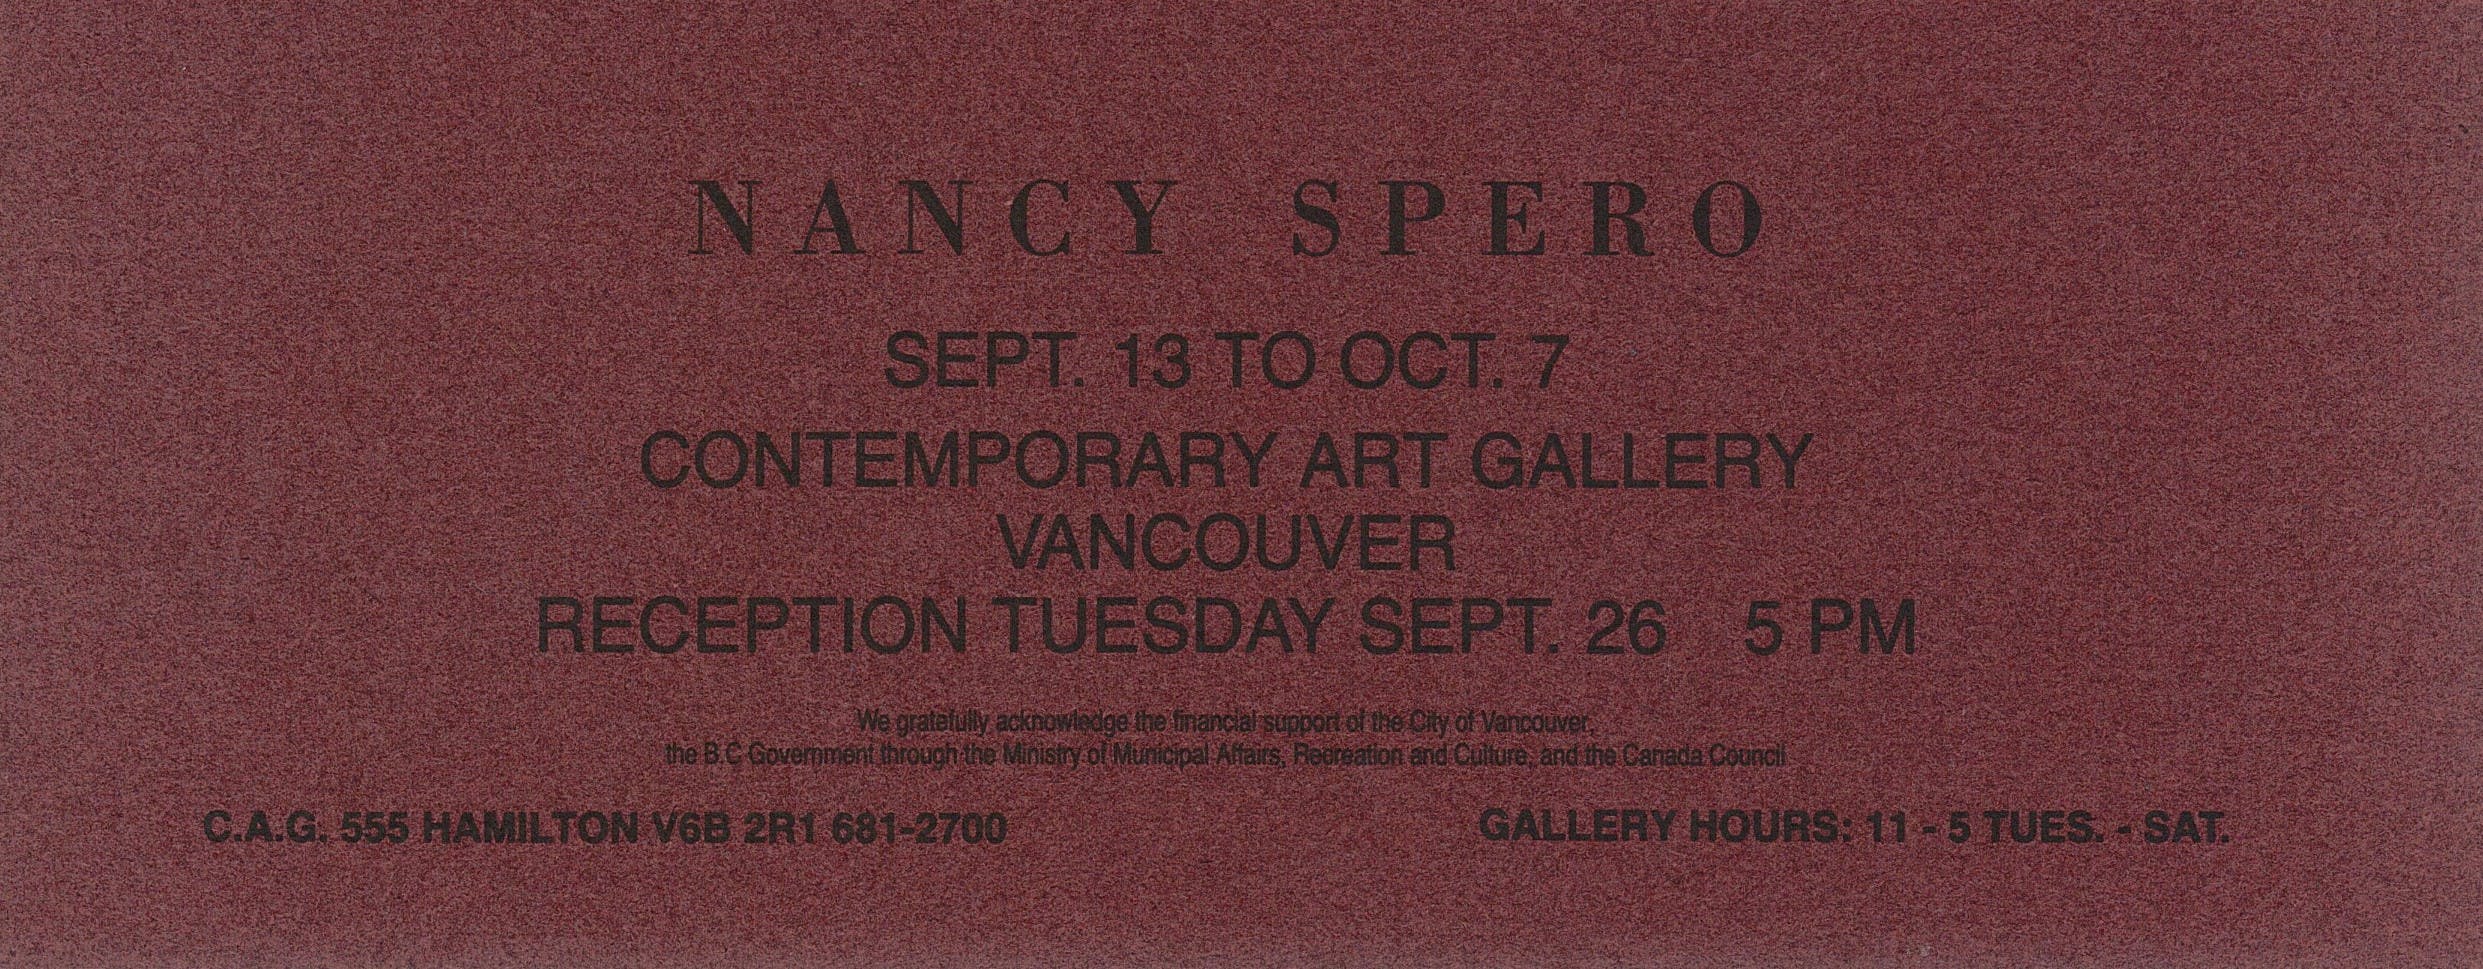 A burgundy coloured exhibition invitation with black text which contains information about the exhibition, the artist;s name, the galley address and hours. 